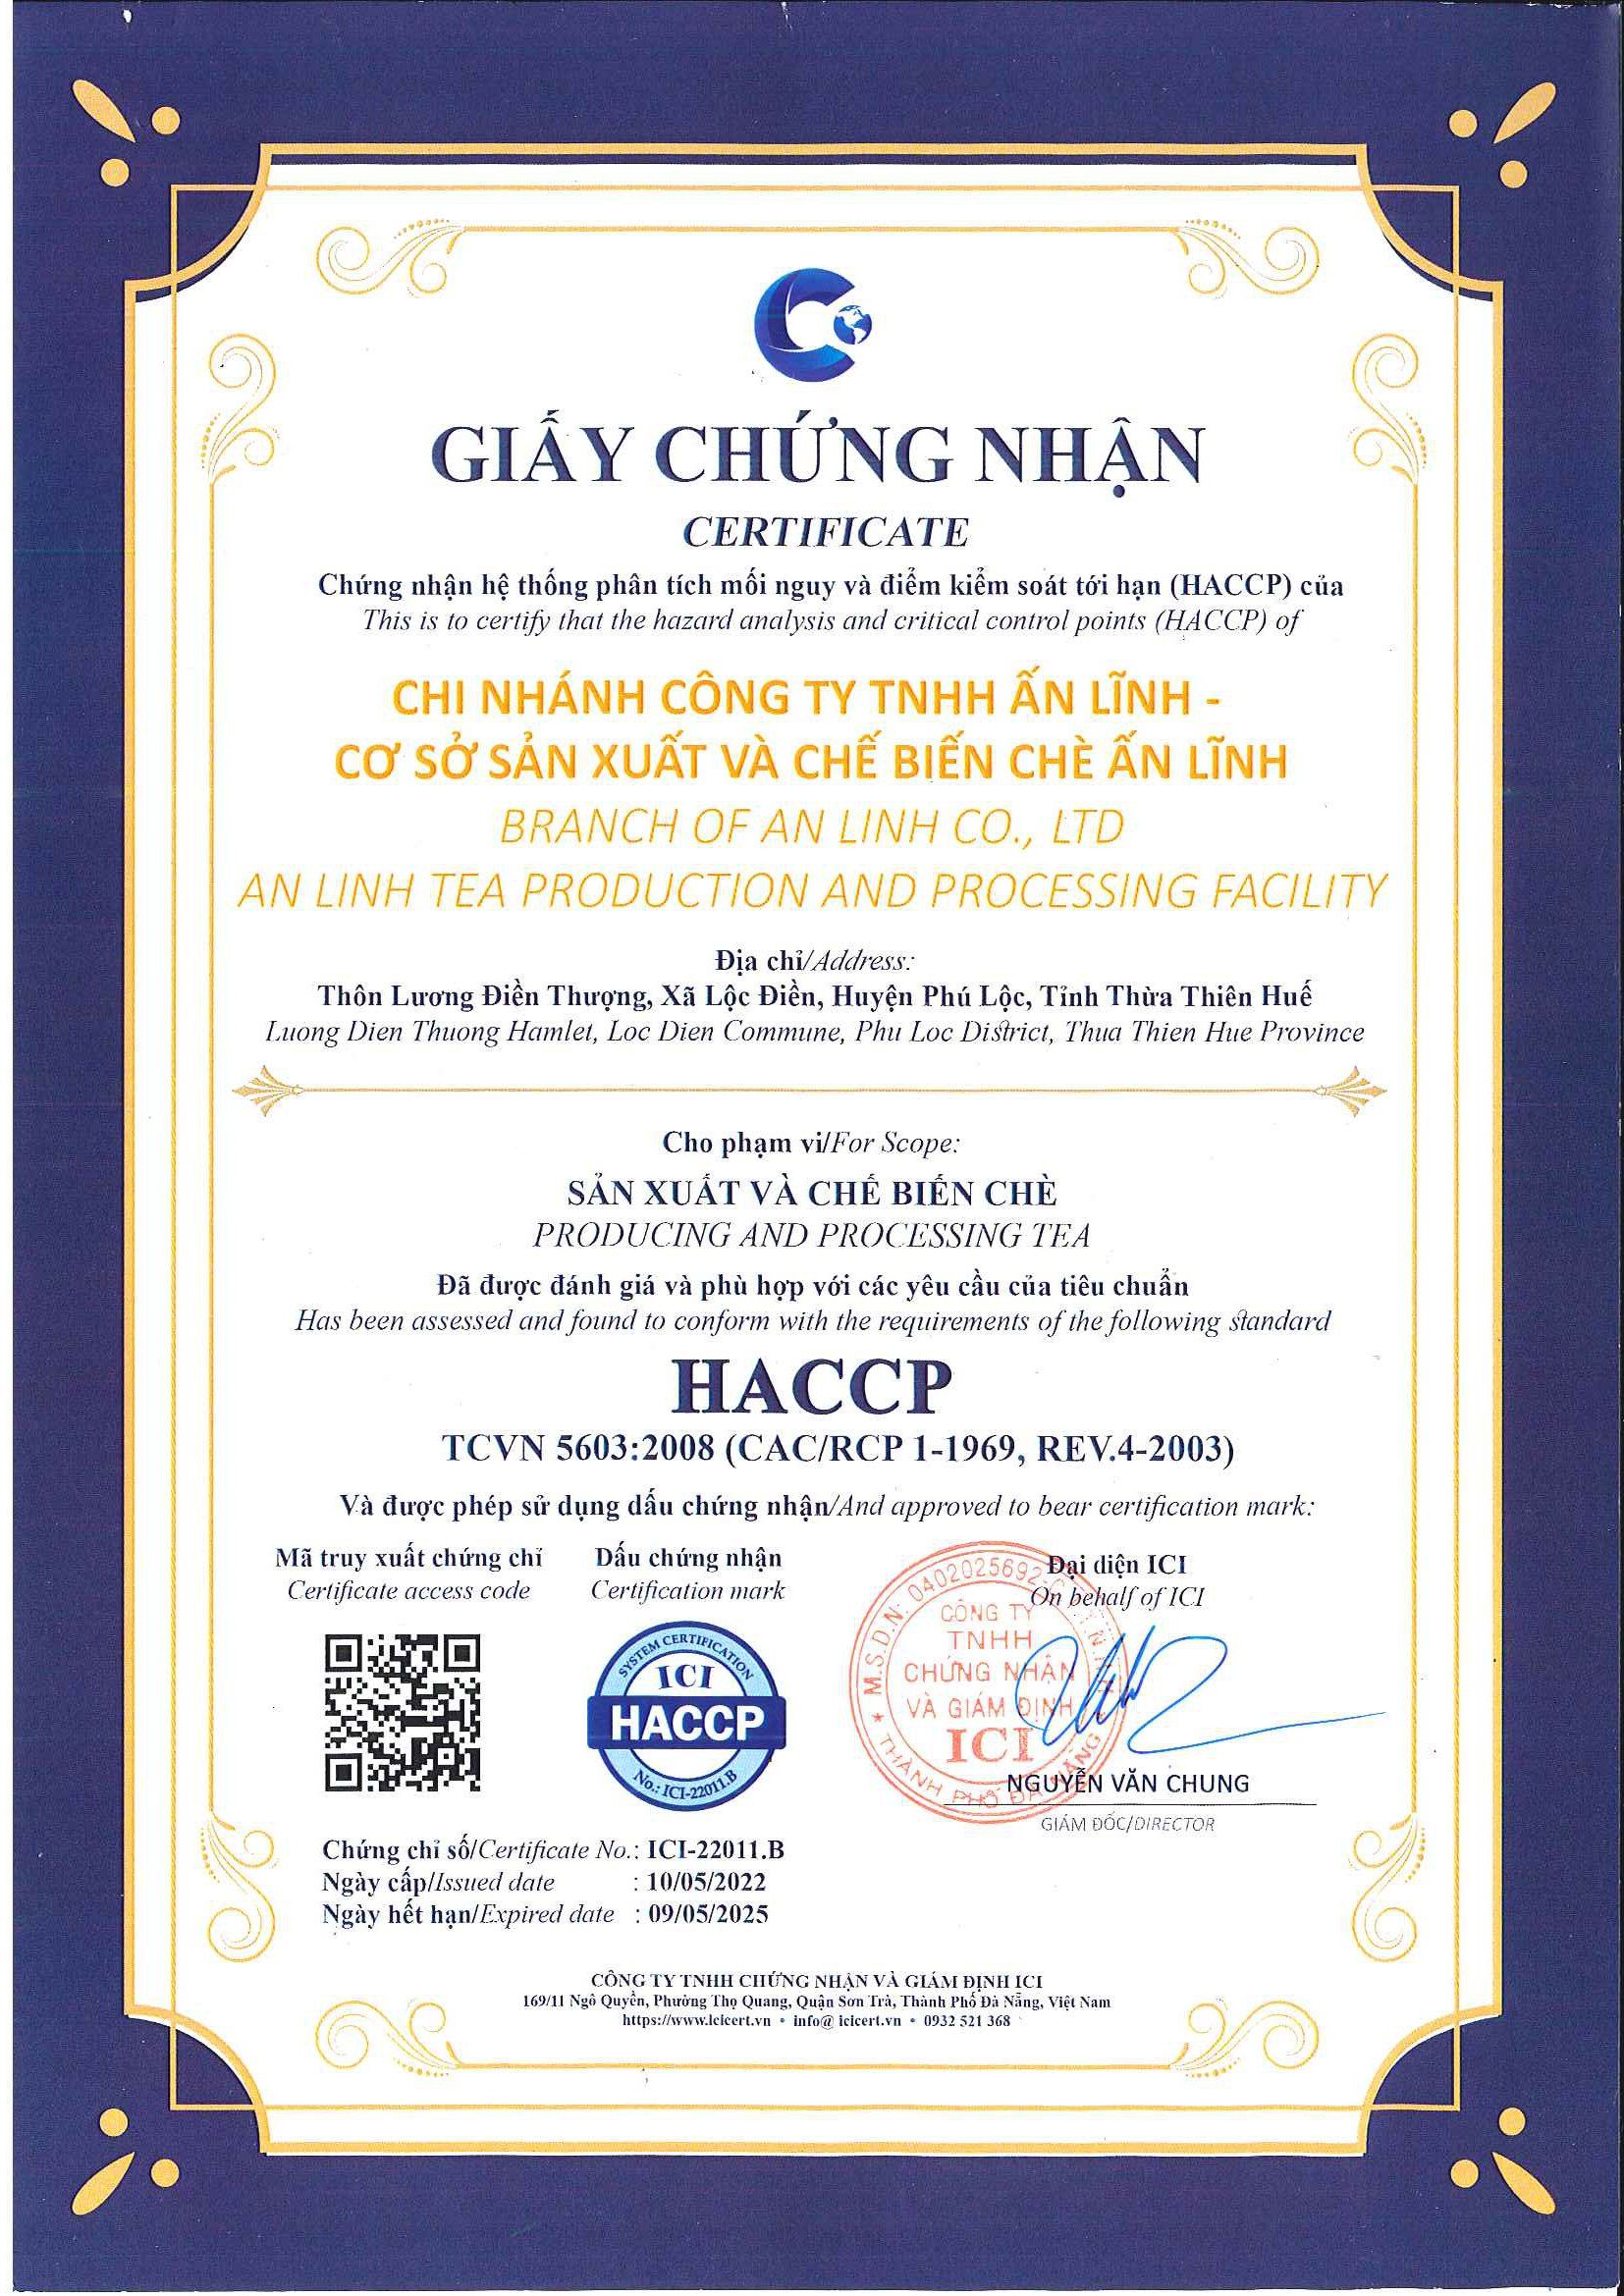 Giấy chứng nhận HACCP - Certificate for Hazard Analaysis and Critical Control Points (HACCP)